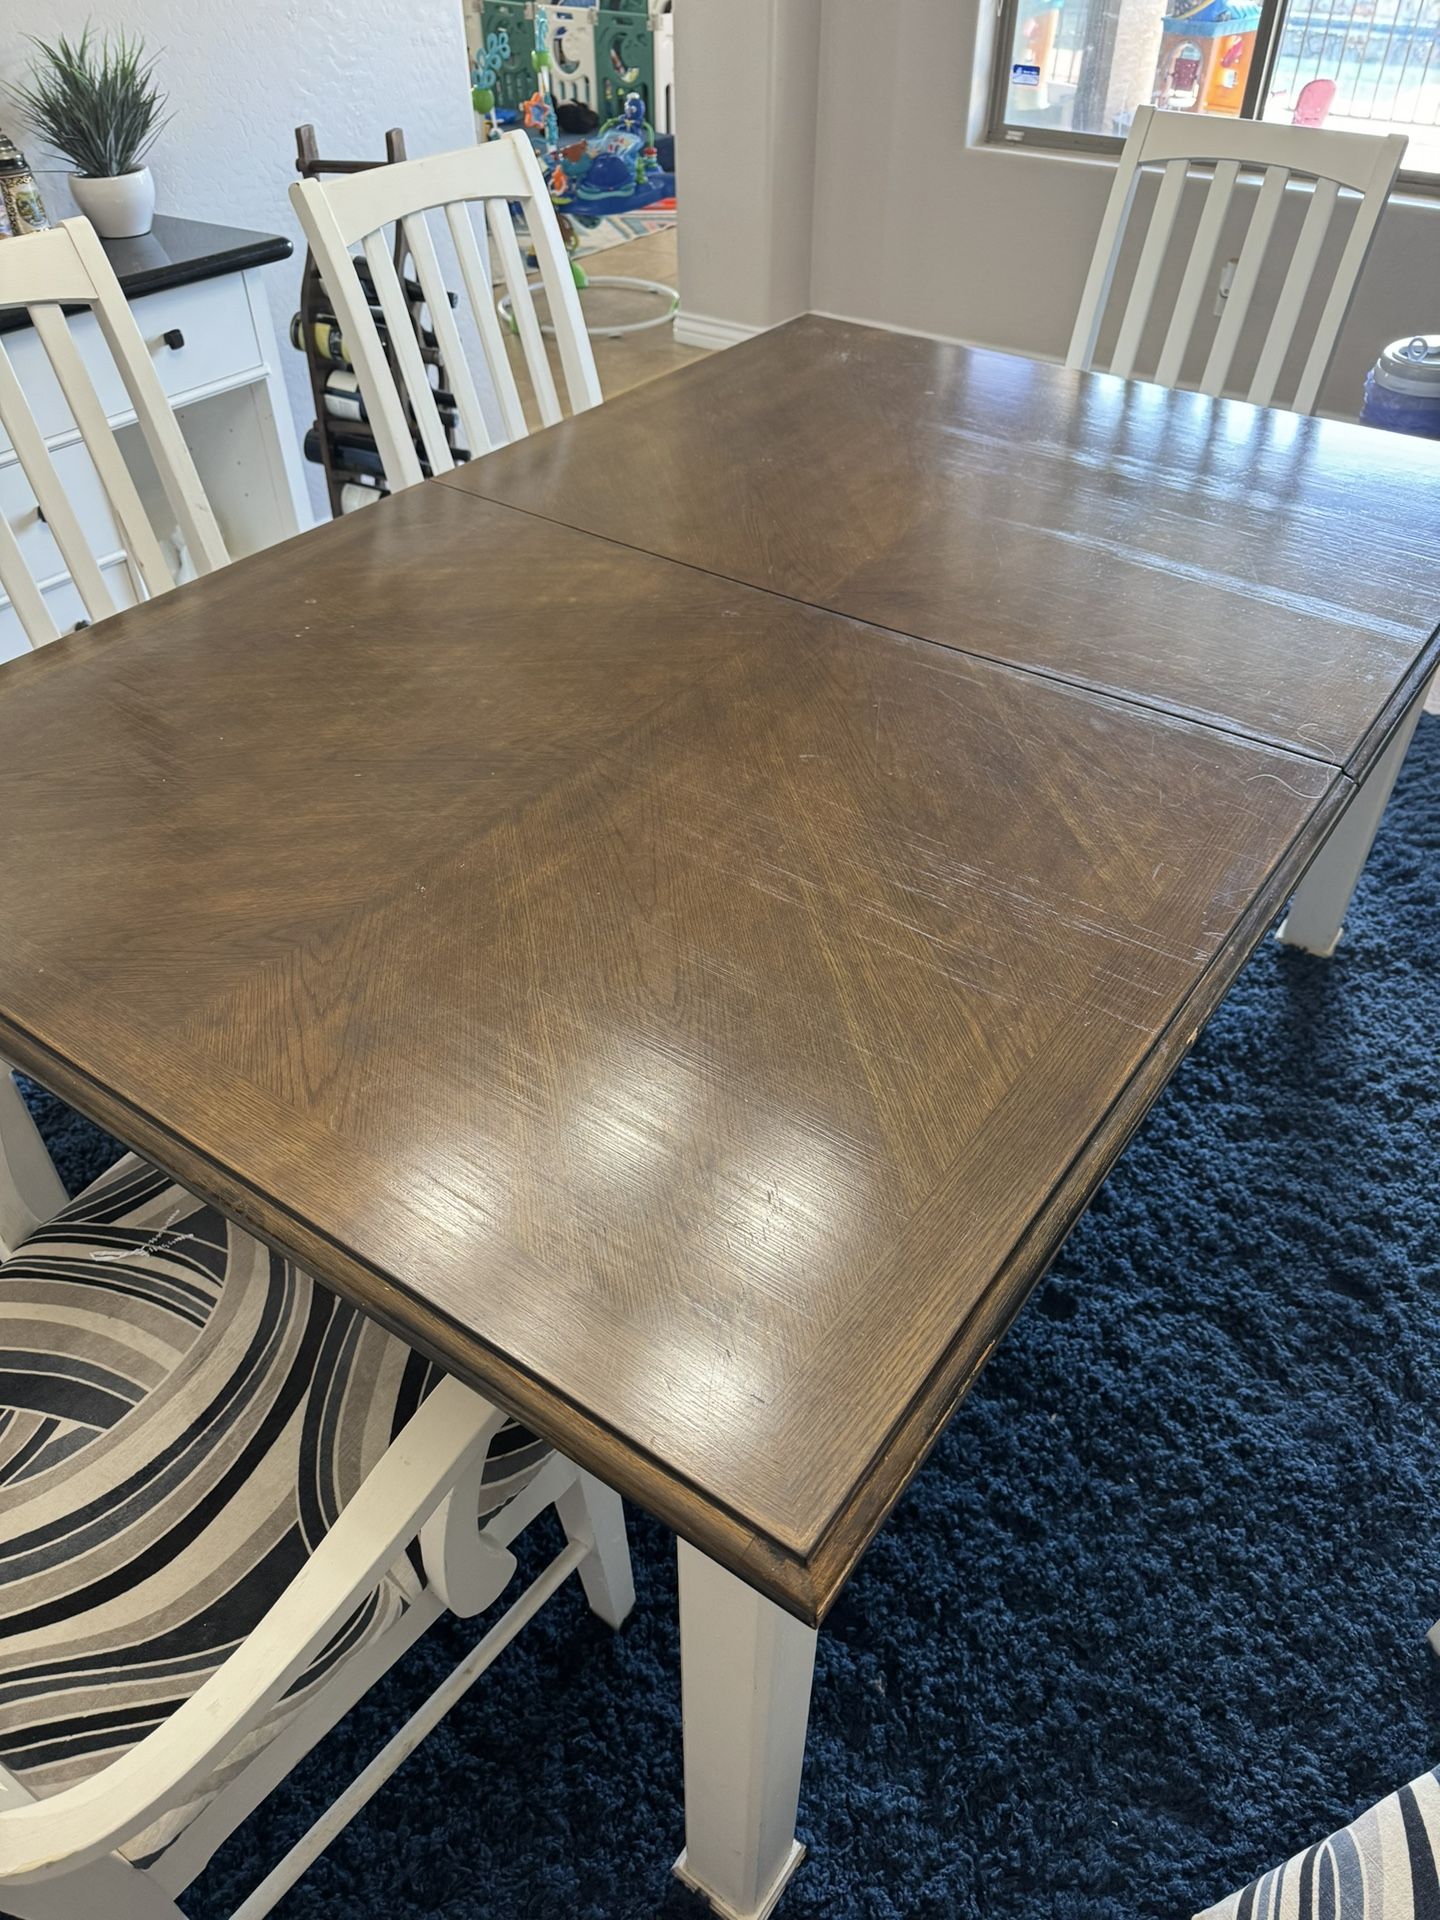 Thomasville Solid Hardwood Kitchen Dining Room Table - No Chairs - Two Extension Leafs